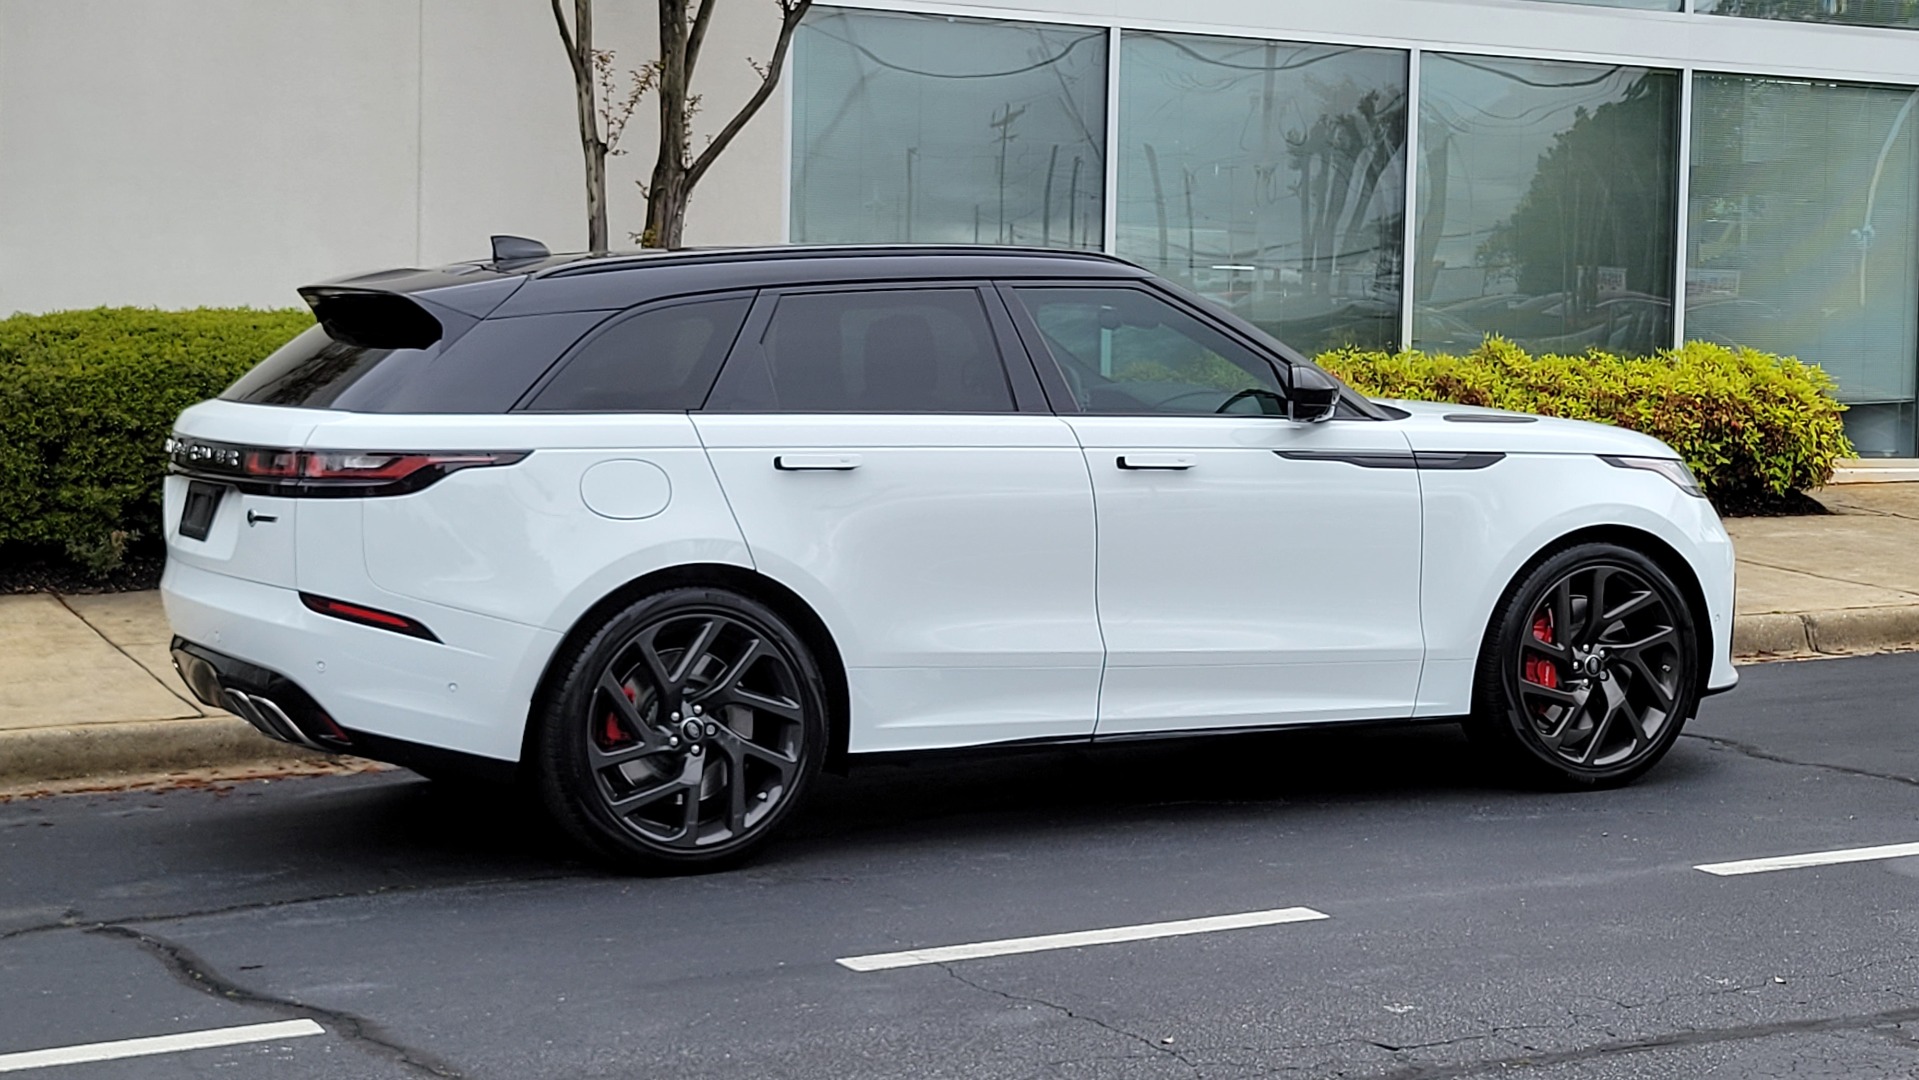 Used 2020 Land Rover Range Rover Velar SVAutobiography Dynamic Edition for sale $90,995 at Formula Imports in Charlotte NC 28227 8